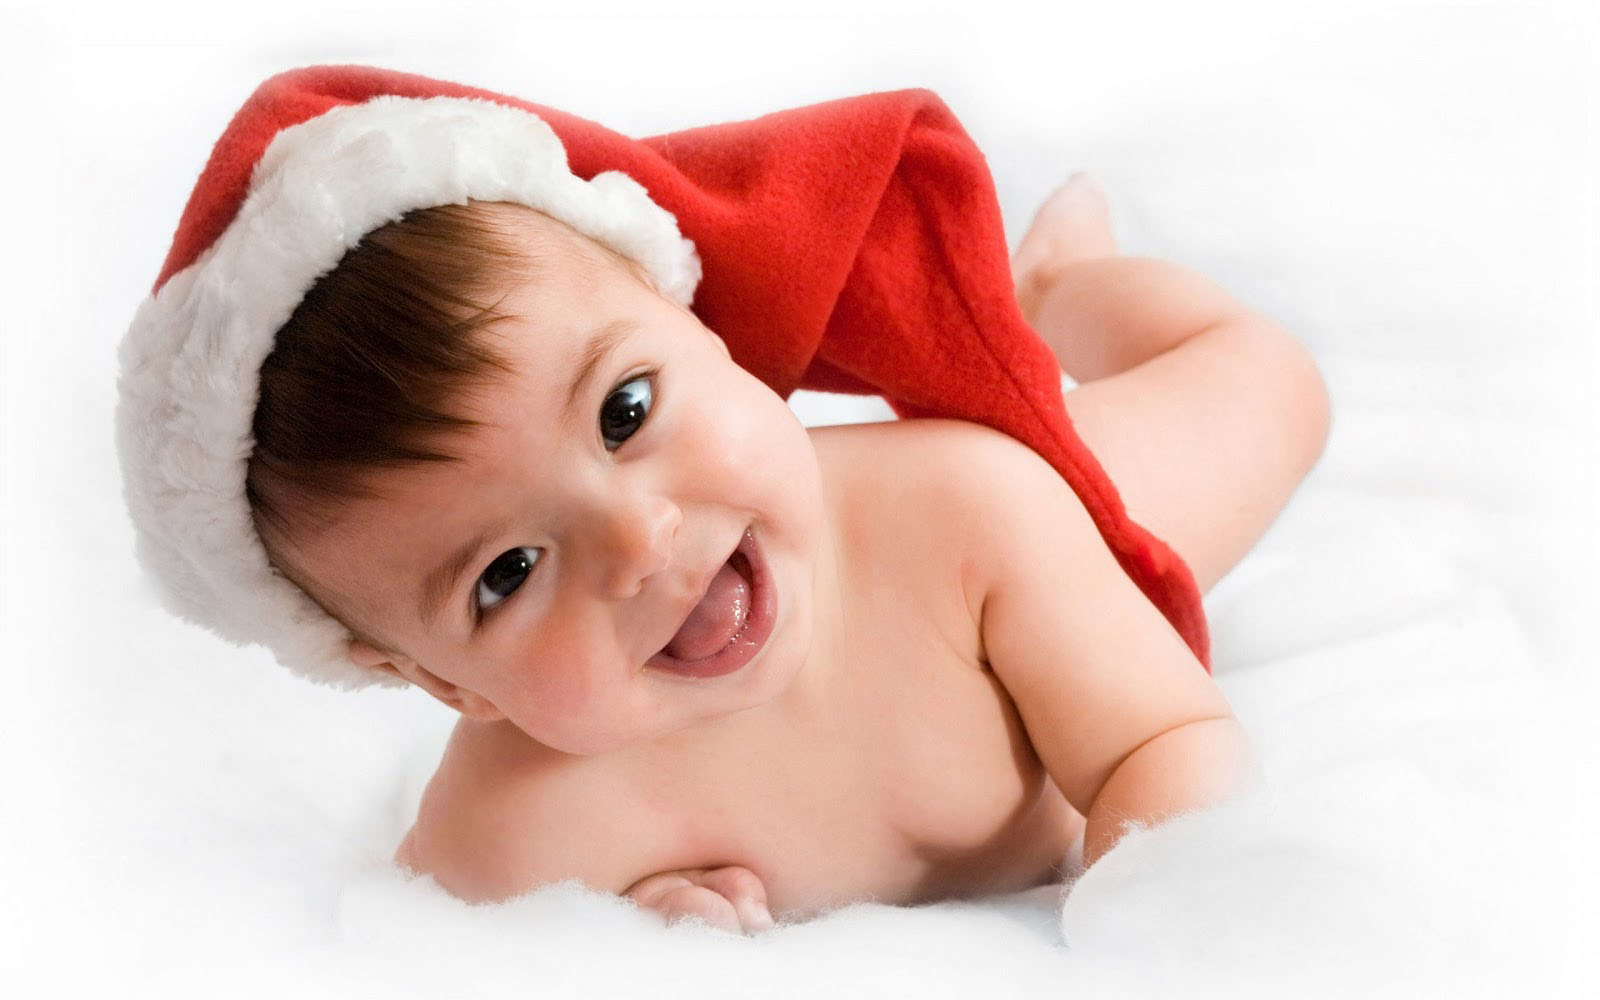 Tag Little Babies Wallpaper Image Photos And Pictures For